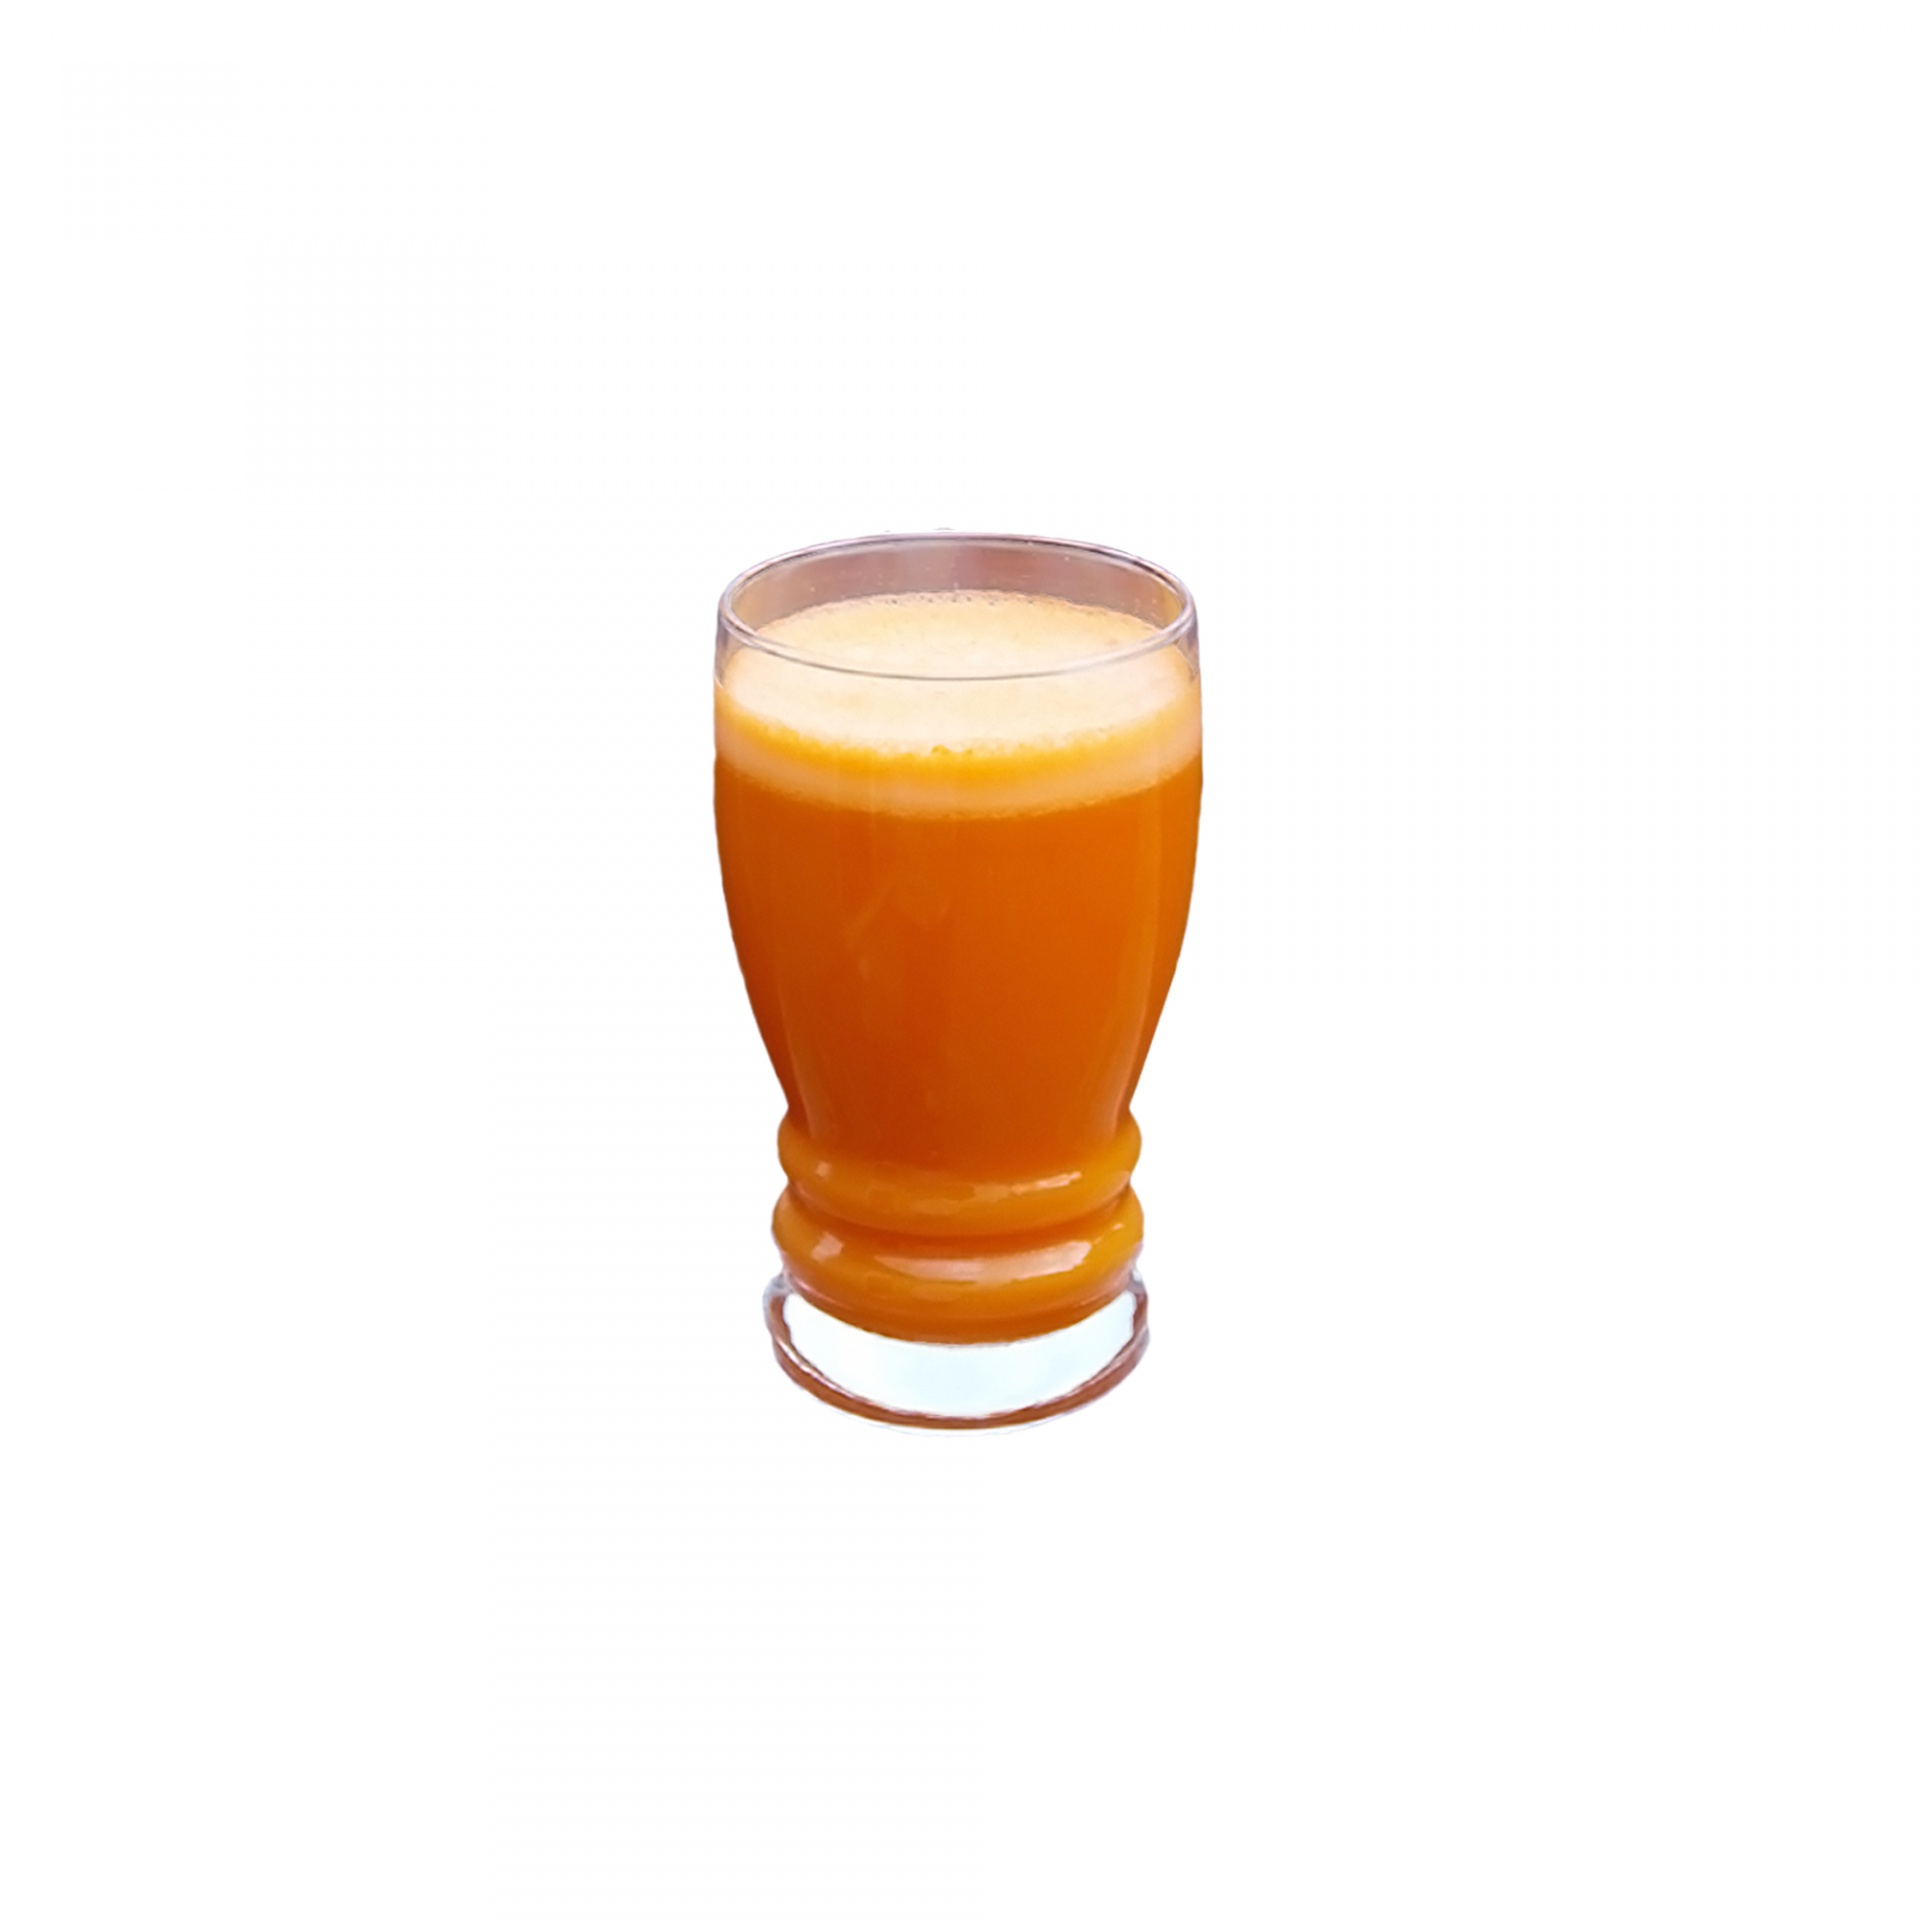 Carrot juice in glass isolated on white background